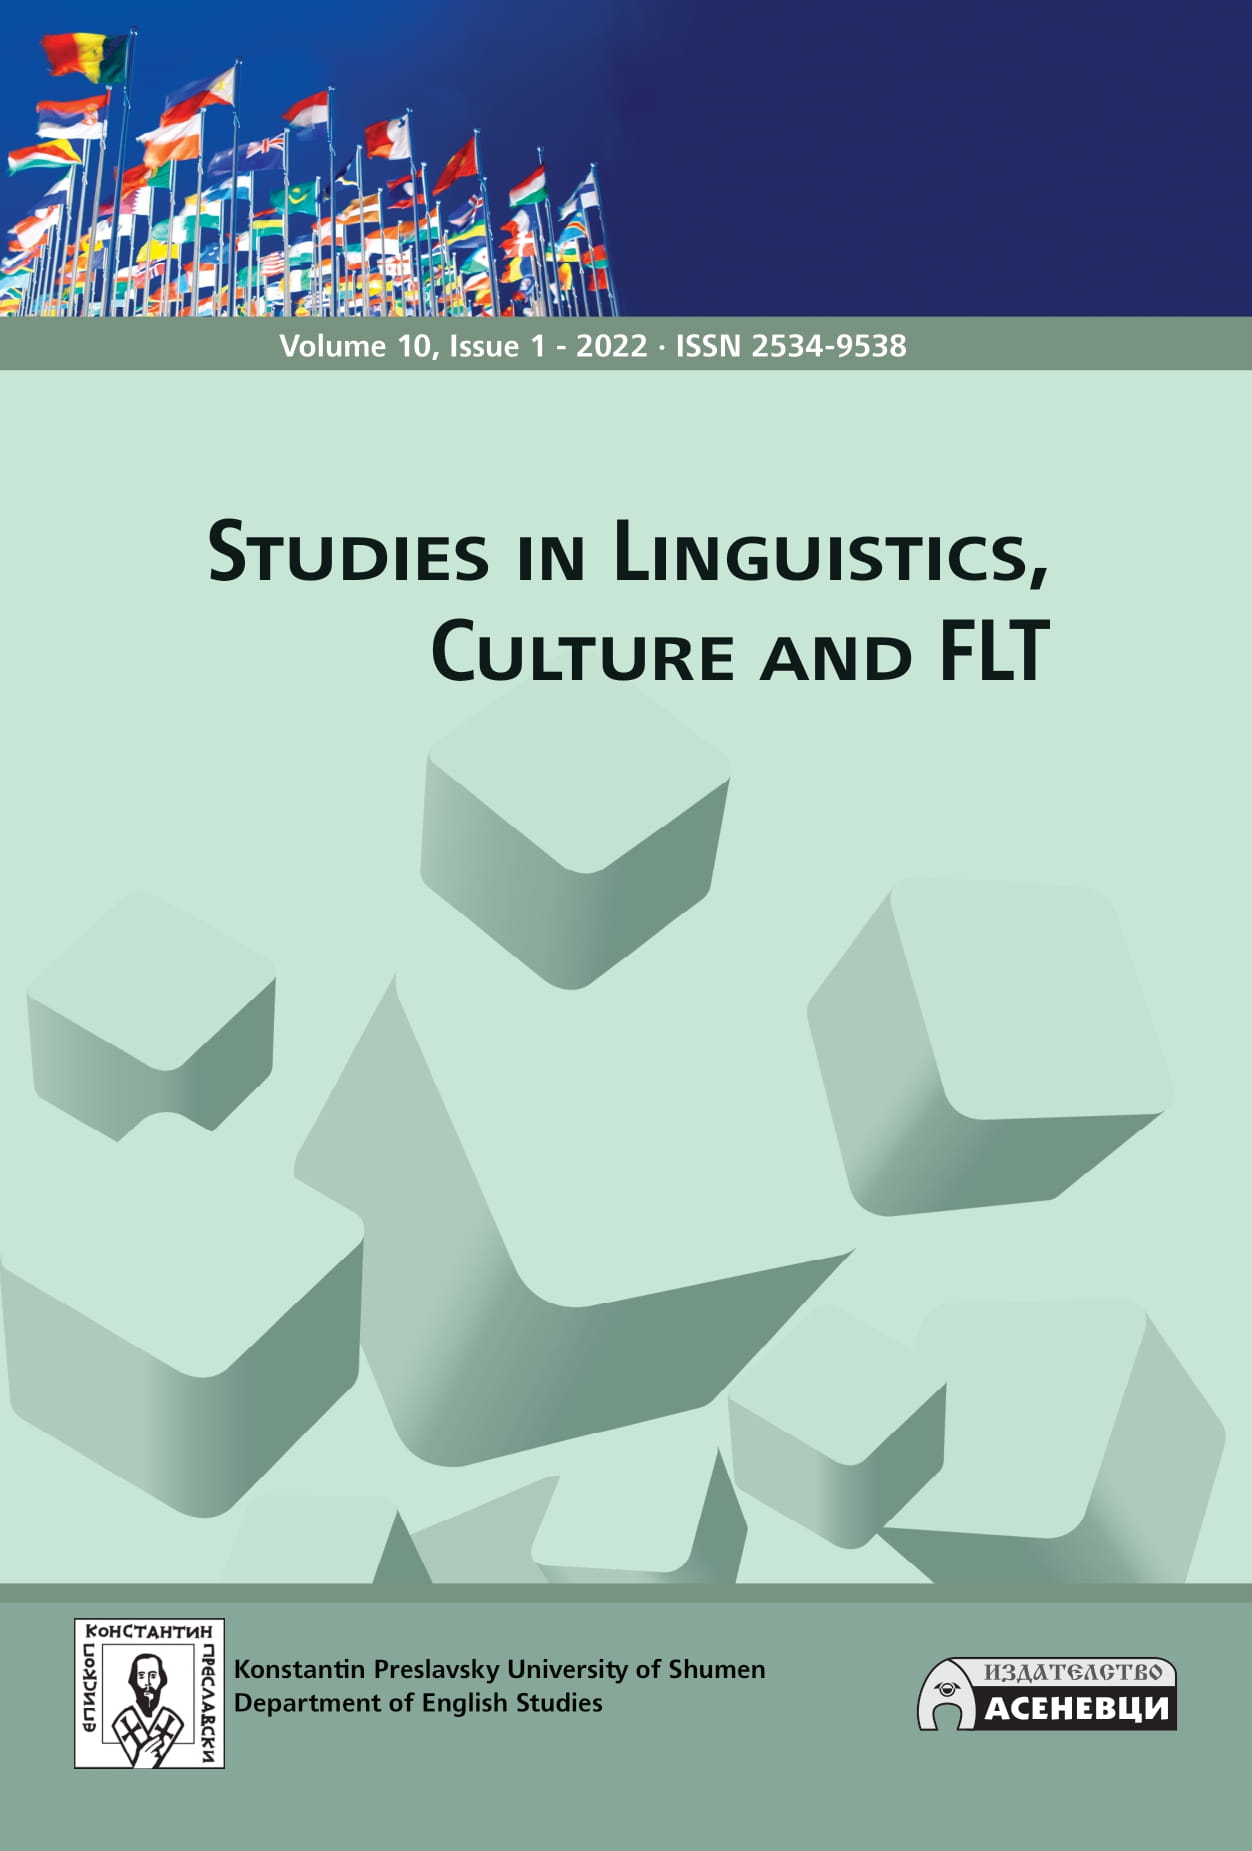 The Use of Conjunctions Among L1 Luganda Speakers of English